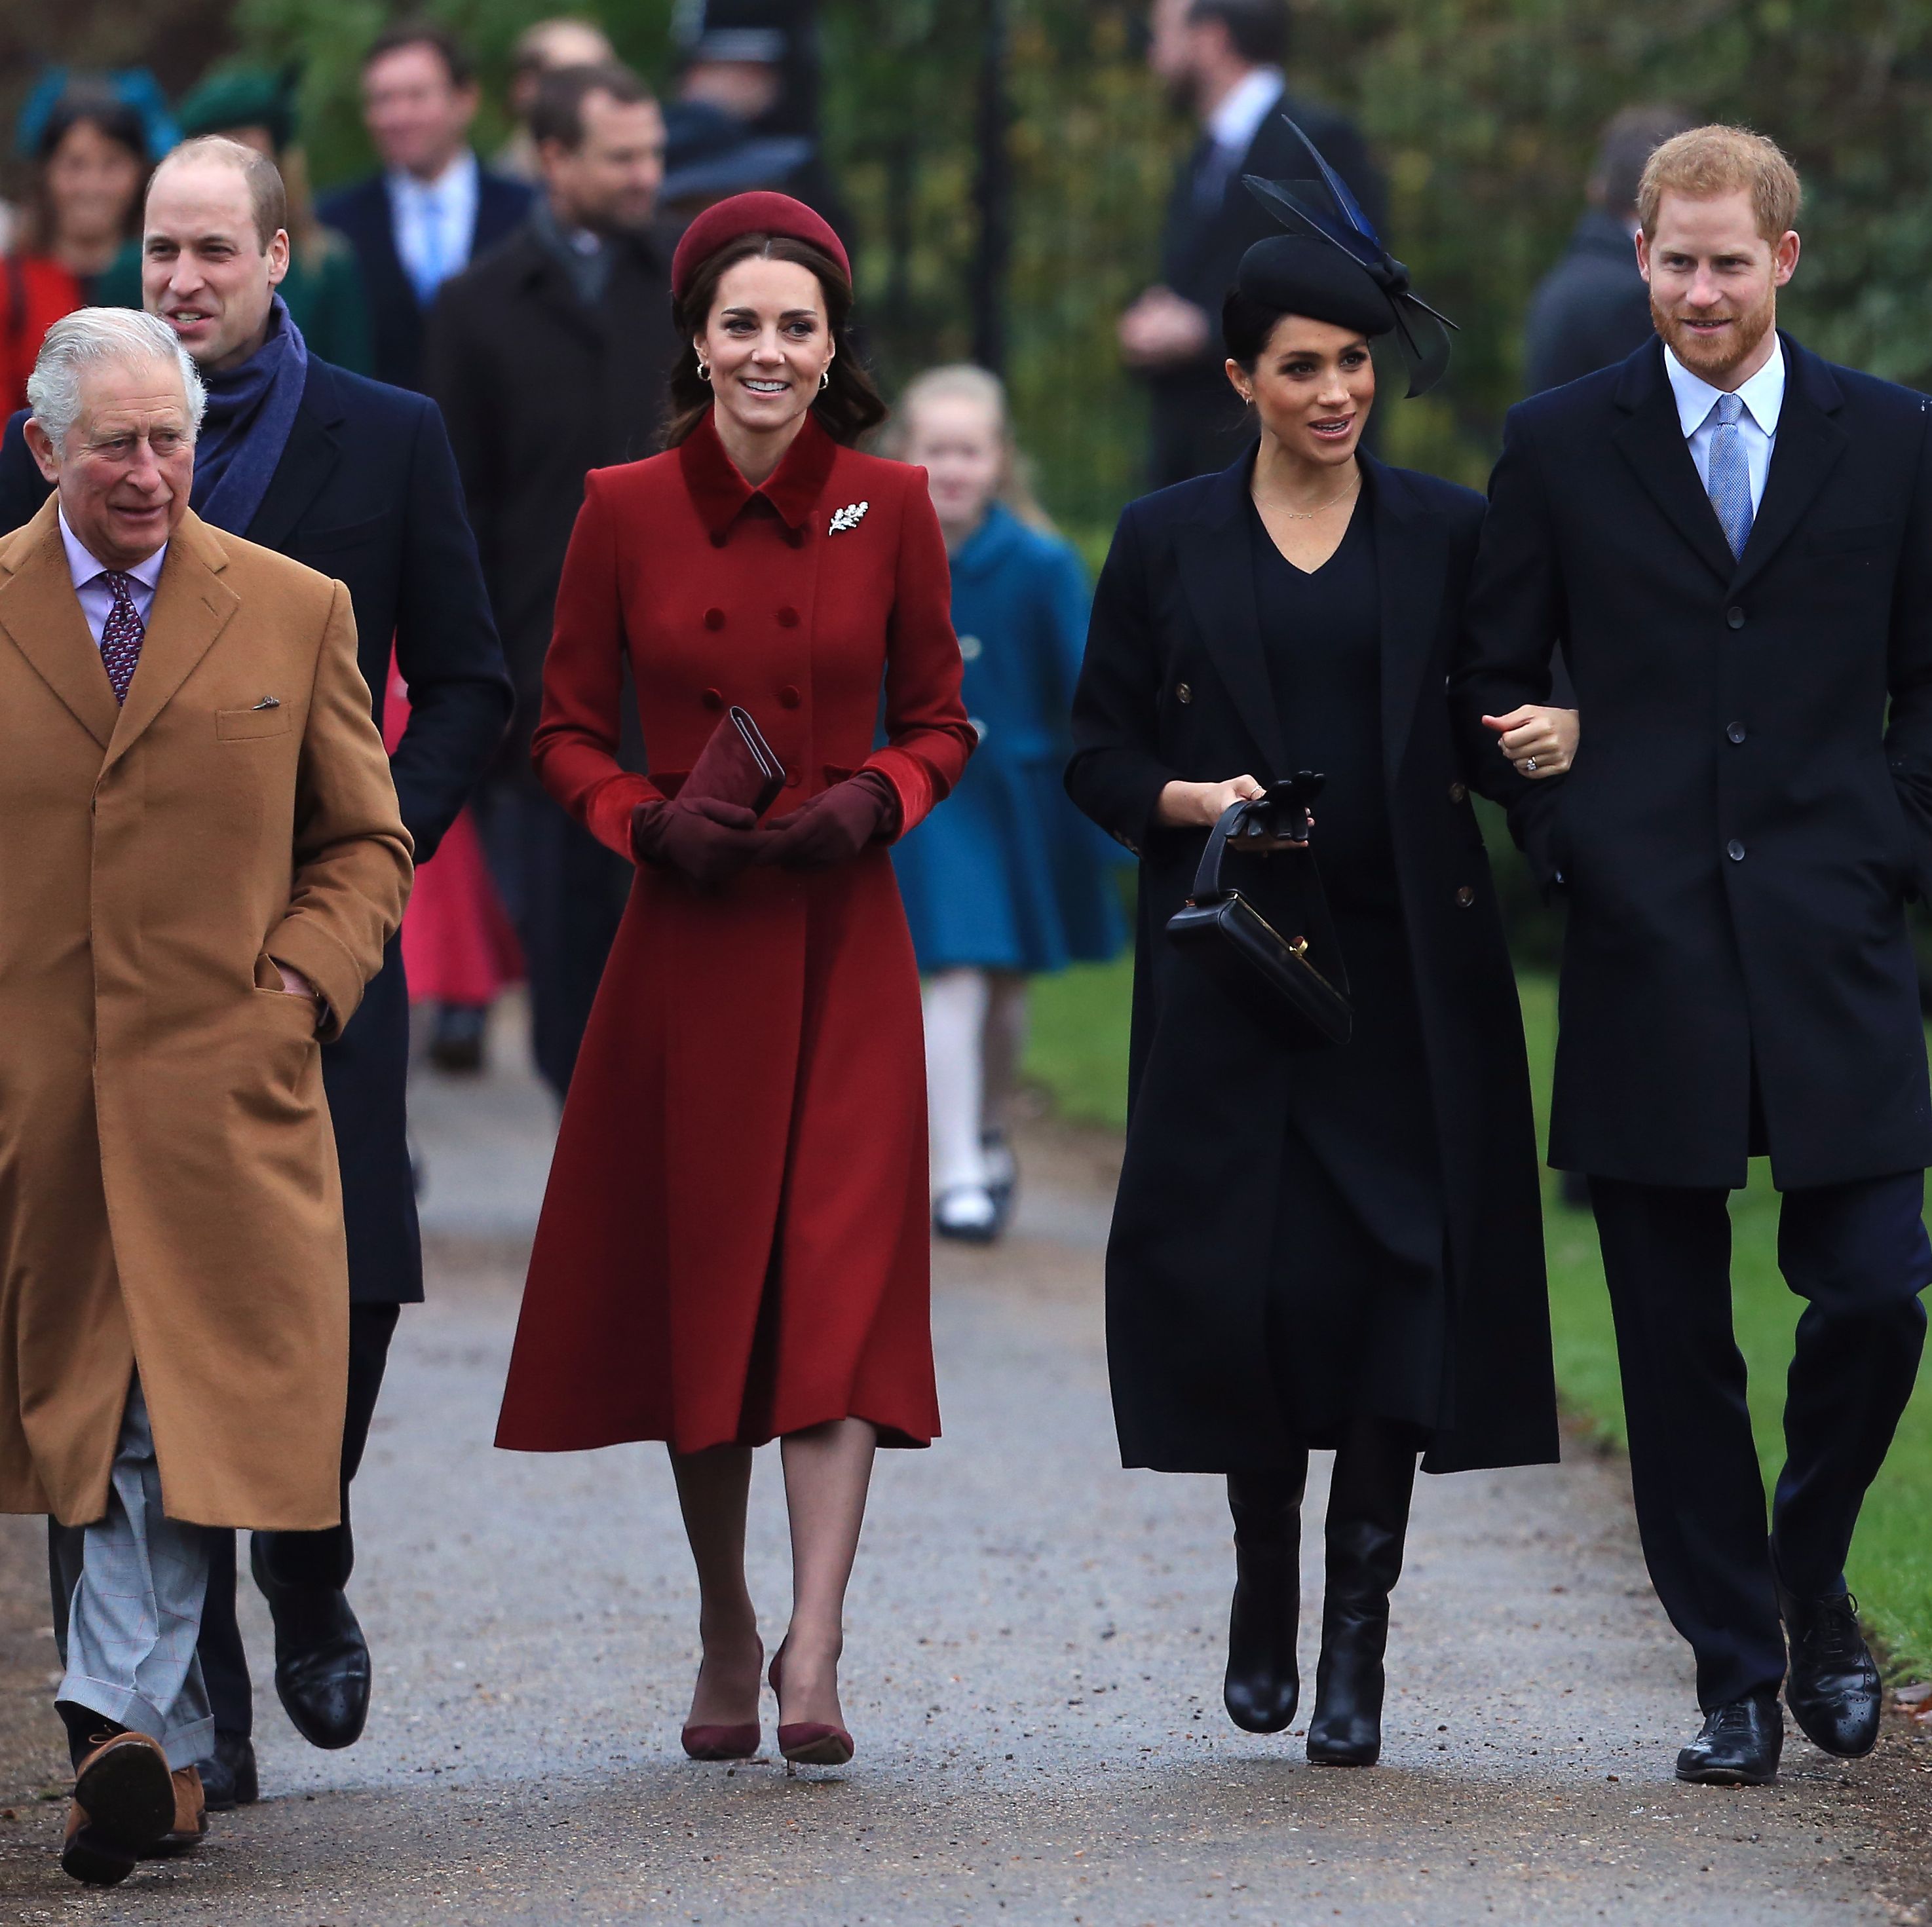 Prince Charles Reportedly Invited the Sussexes to Come Stay with Him But Security Is a Major Concern